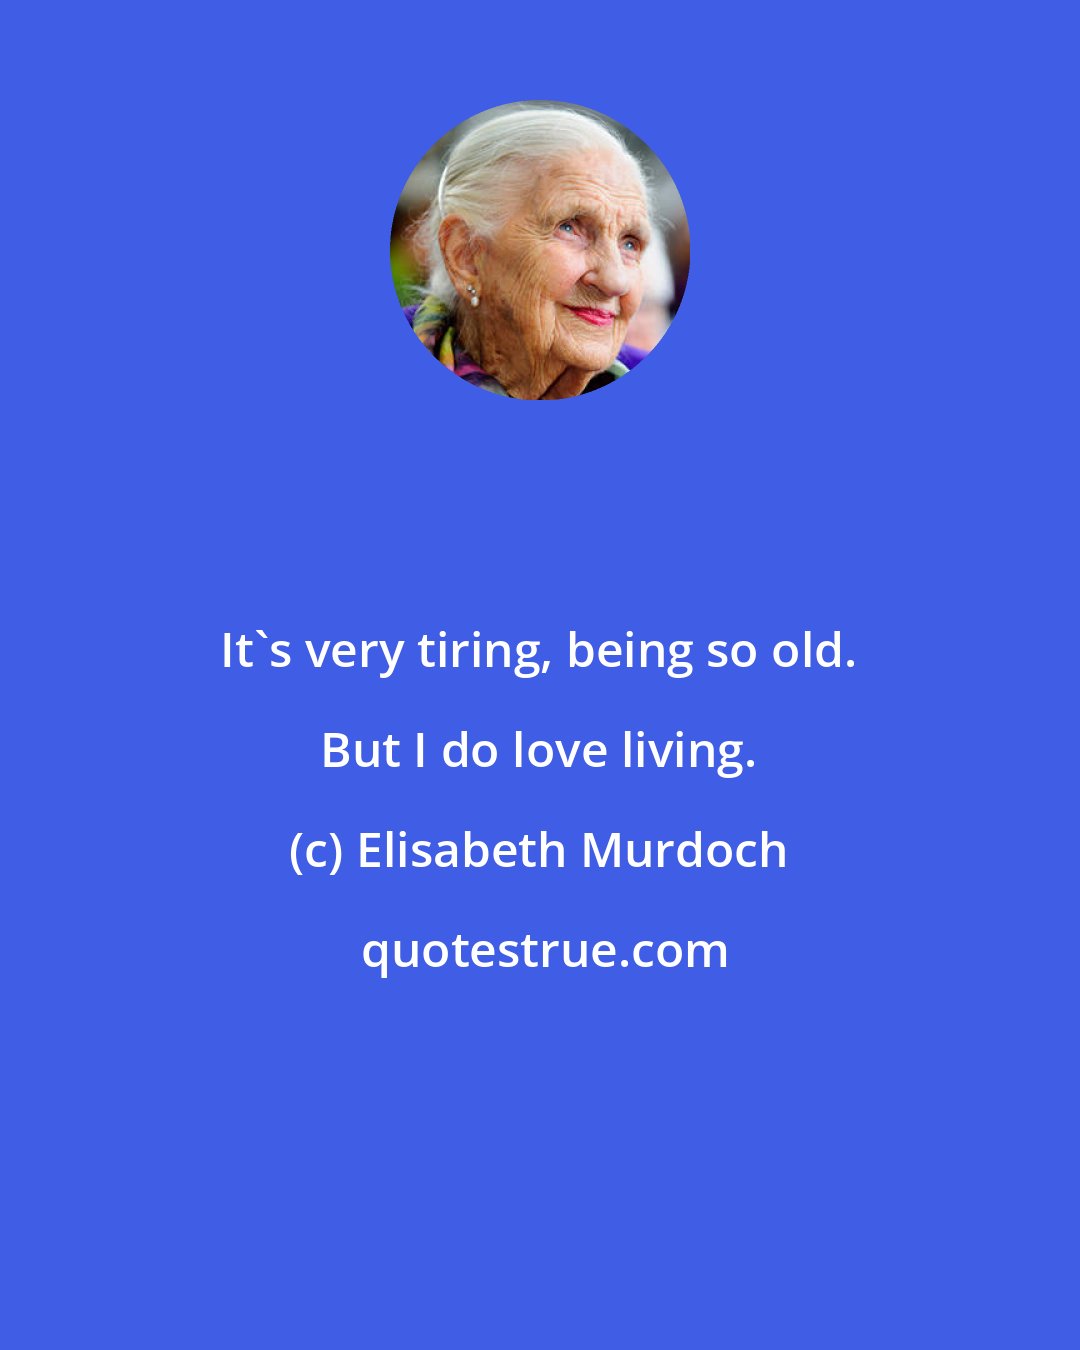 Elisabeth Murdoch: It's very tiring, being so old. But I do love living.